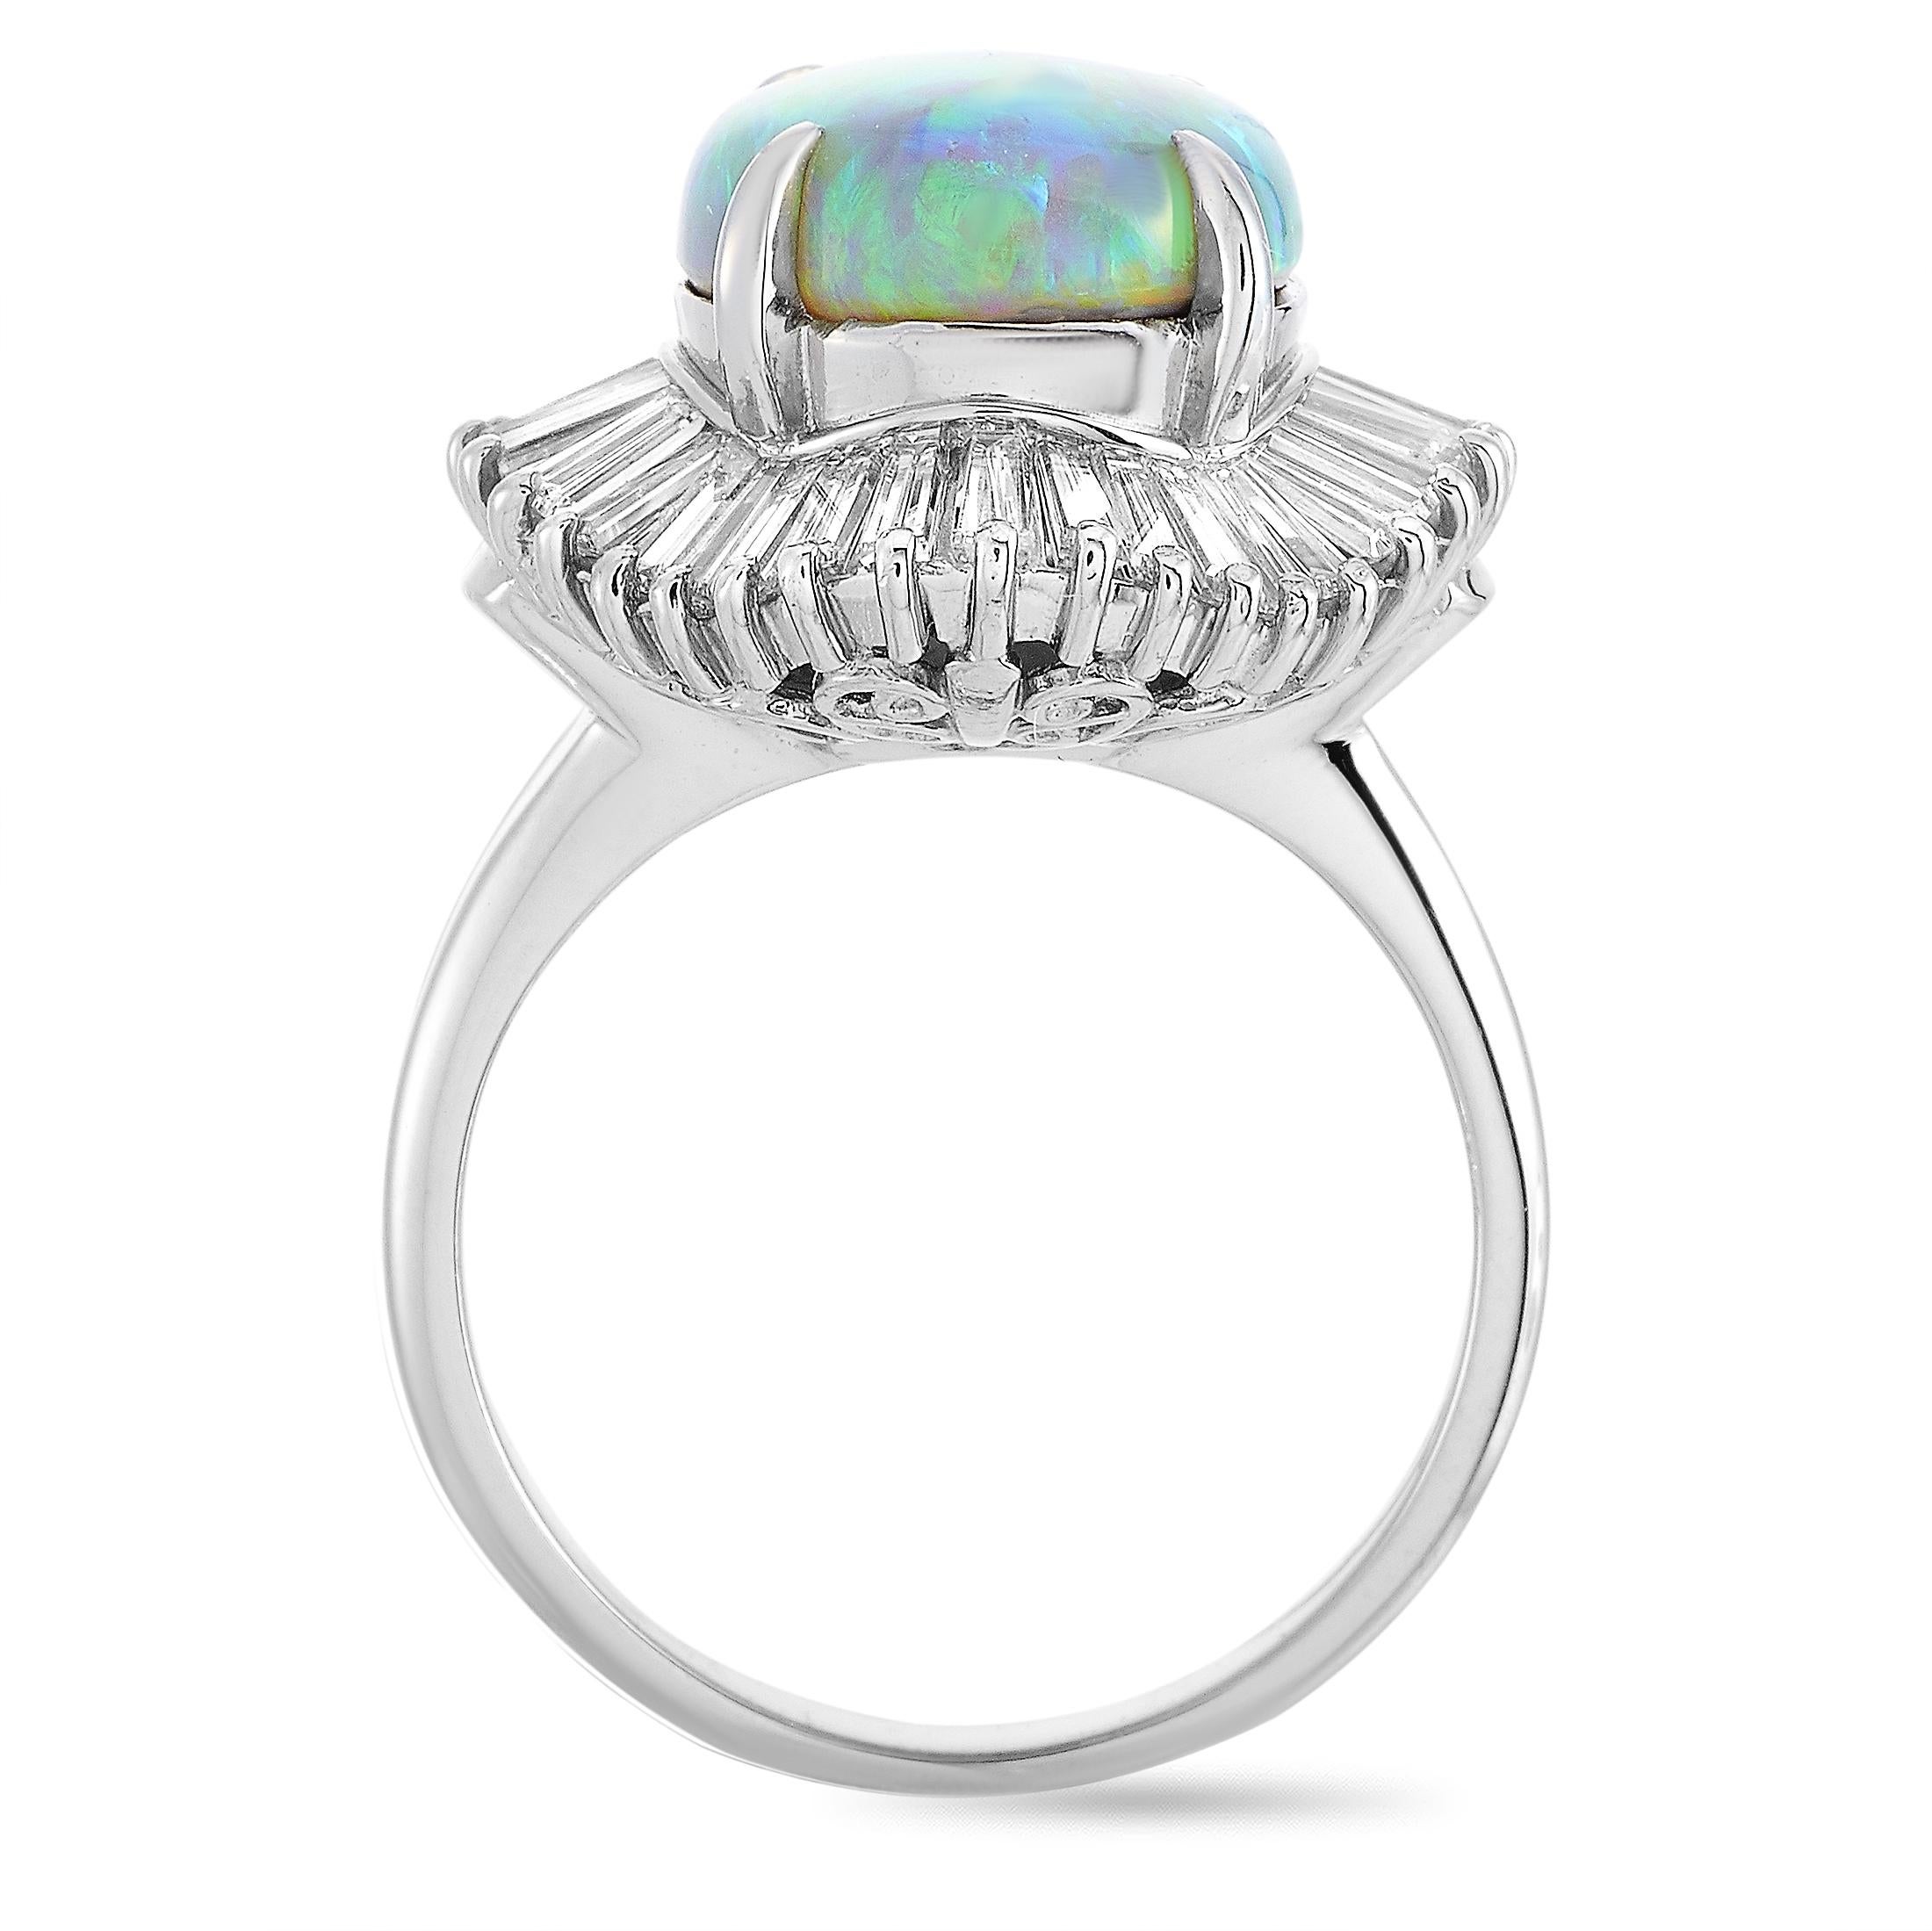 This LB Exclusive ring is made of platinum and set with a 3.39 ct opal and a total of 1.32 carats of diamonds. The ring weighs 11.3 grams, boasting band thickness of 3 mm and top height of 10 mm, while top dimensions measure 20 by 17 mm.
 
 Offered